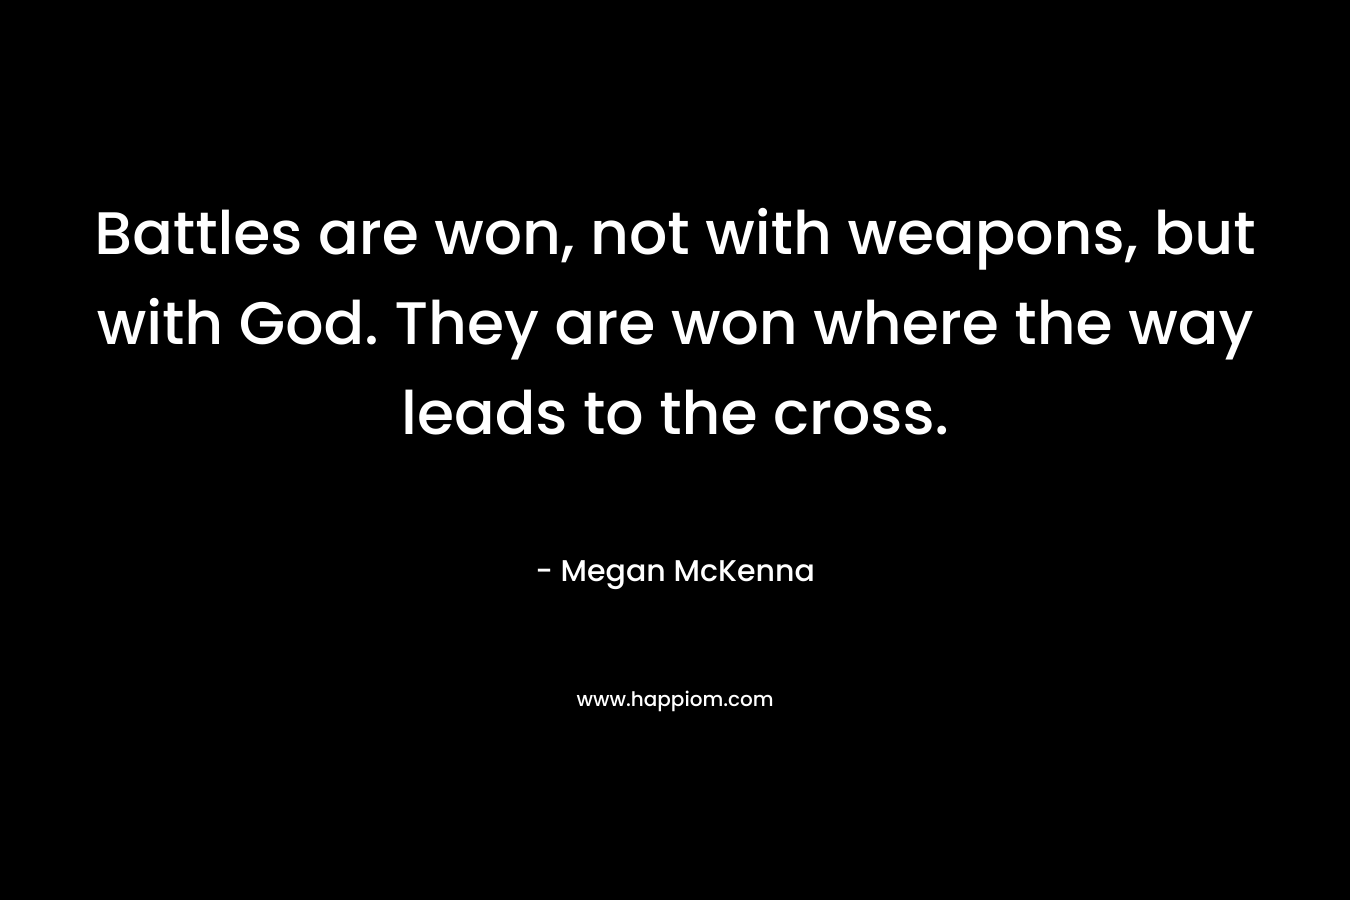 Battles are won, not with weapons, but with God. They are won where the way leads to the cross.